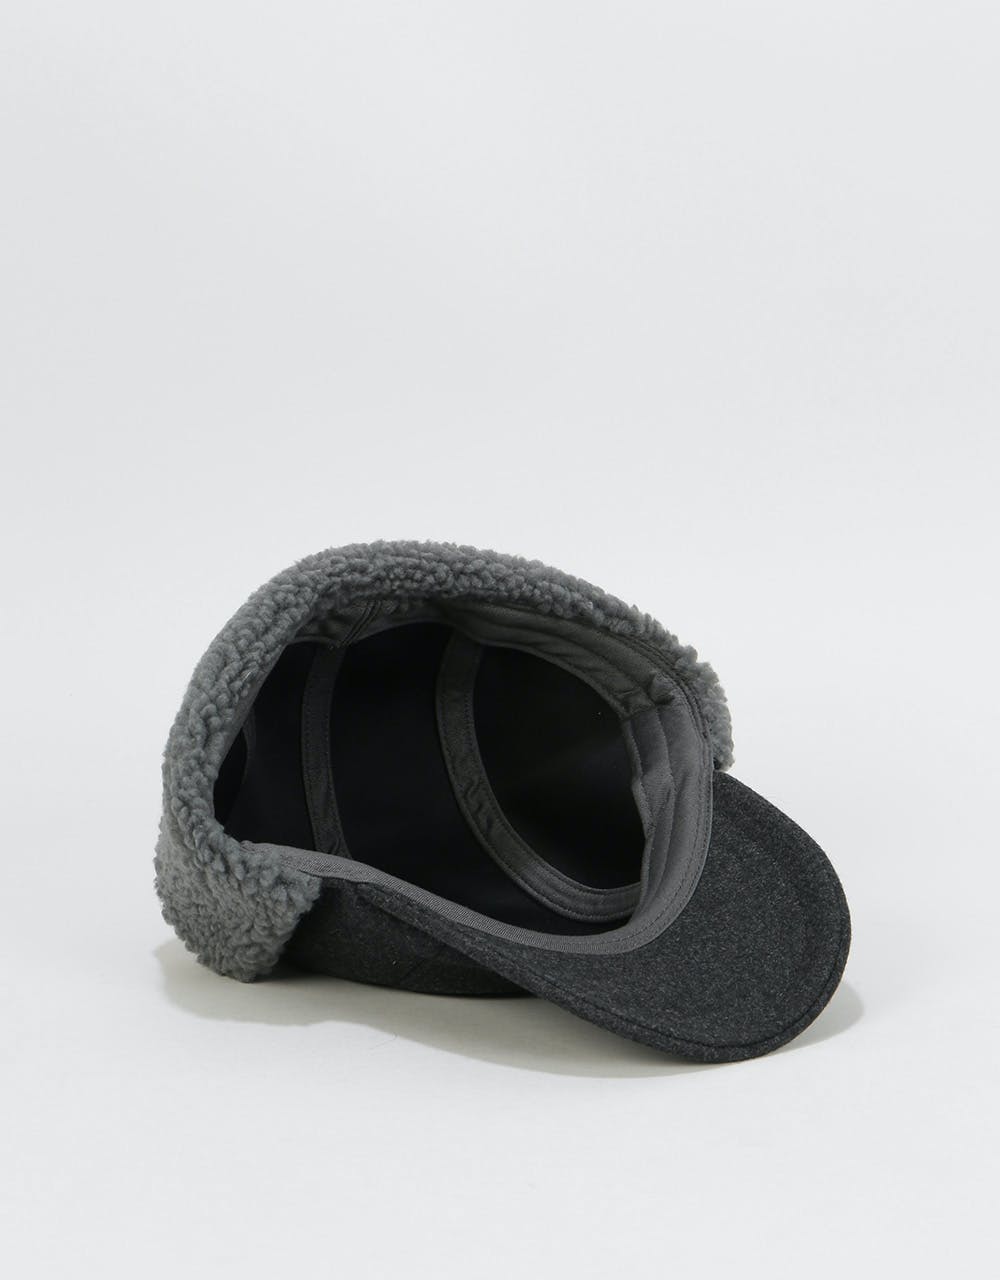 Patagonia Recycled Wool Earflap Cap - Forge Grey